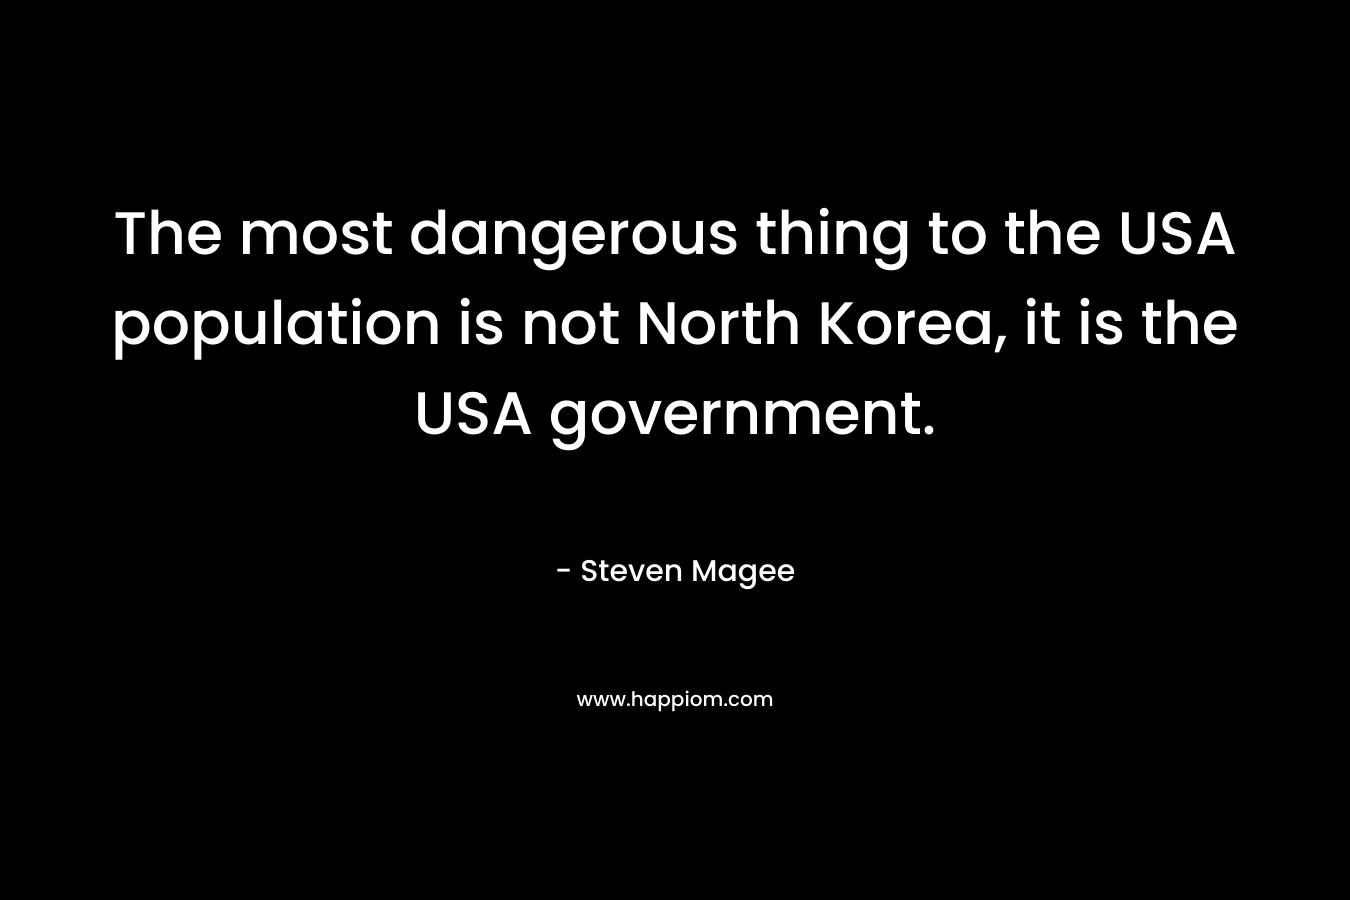 The most dangerous thing to the USA population is not North Korea, it is the USA government.